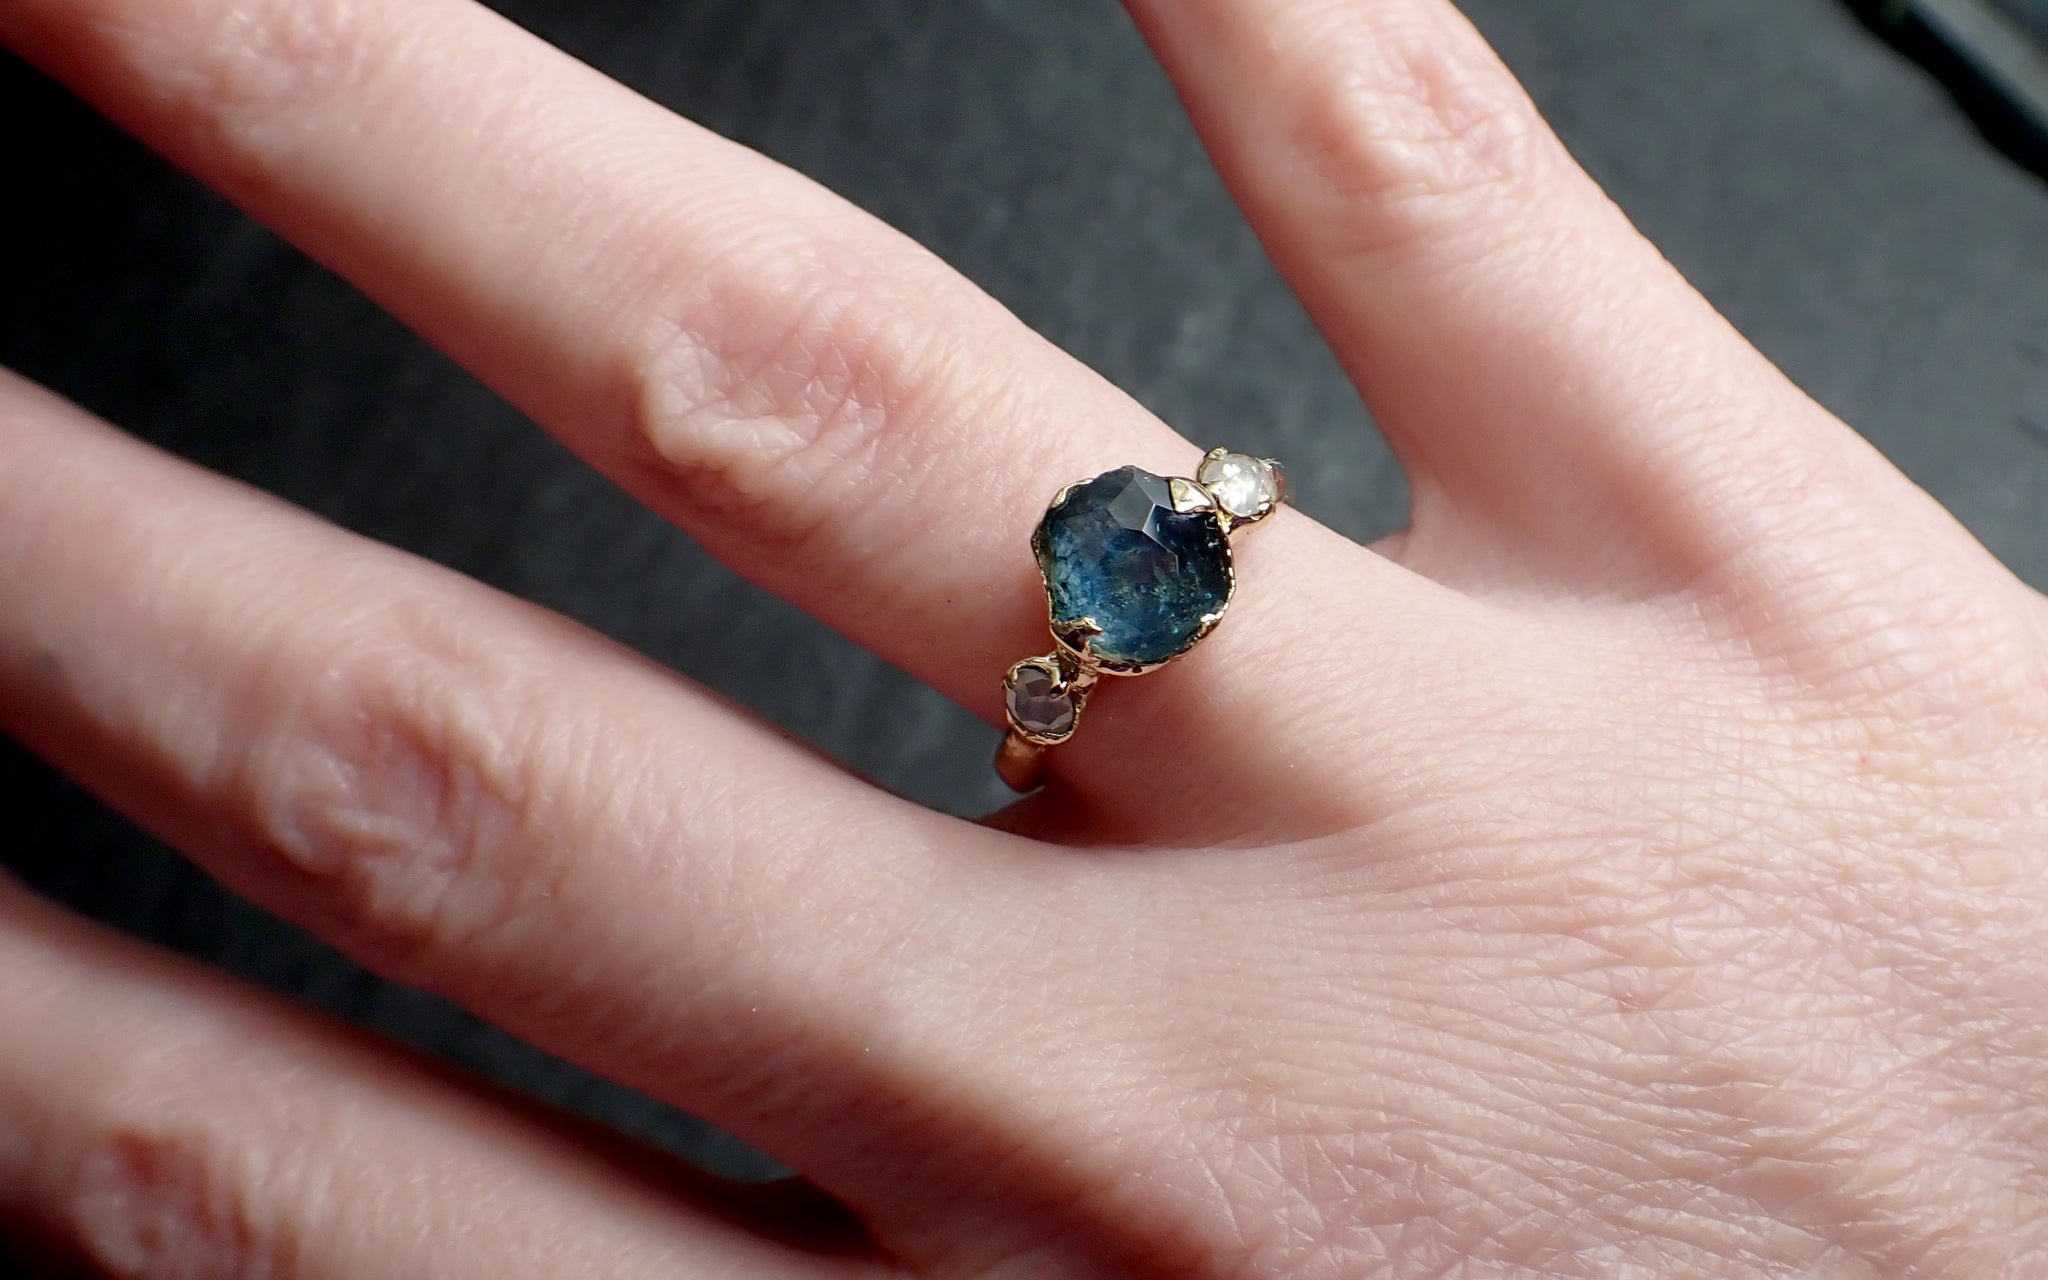 partially faceted blue montana sapphire and fancy diamonds 14k gold engagement wedding ring custom gemstone ring multi stone ring 2412 Alternative Engagement